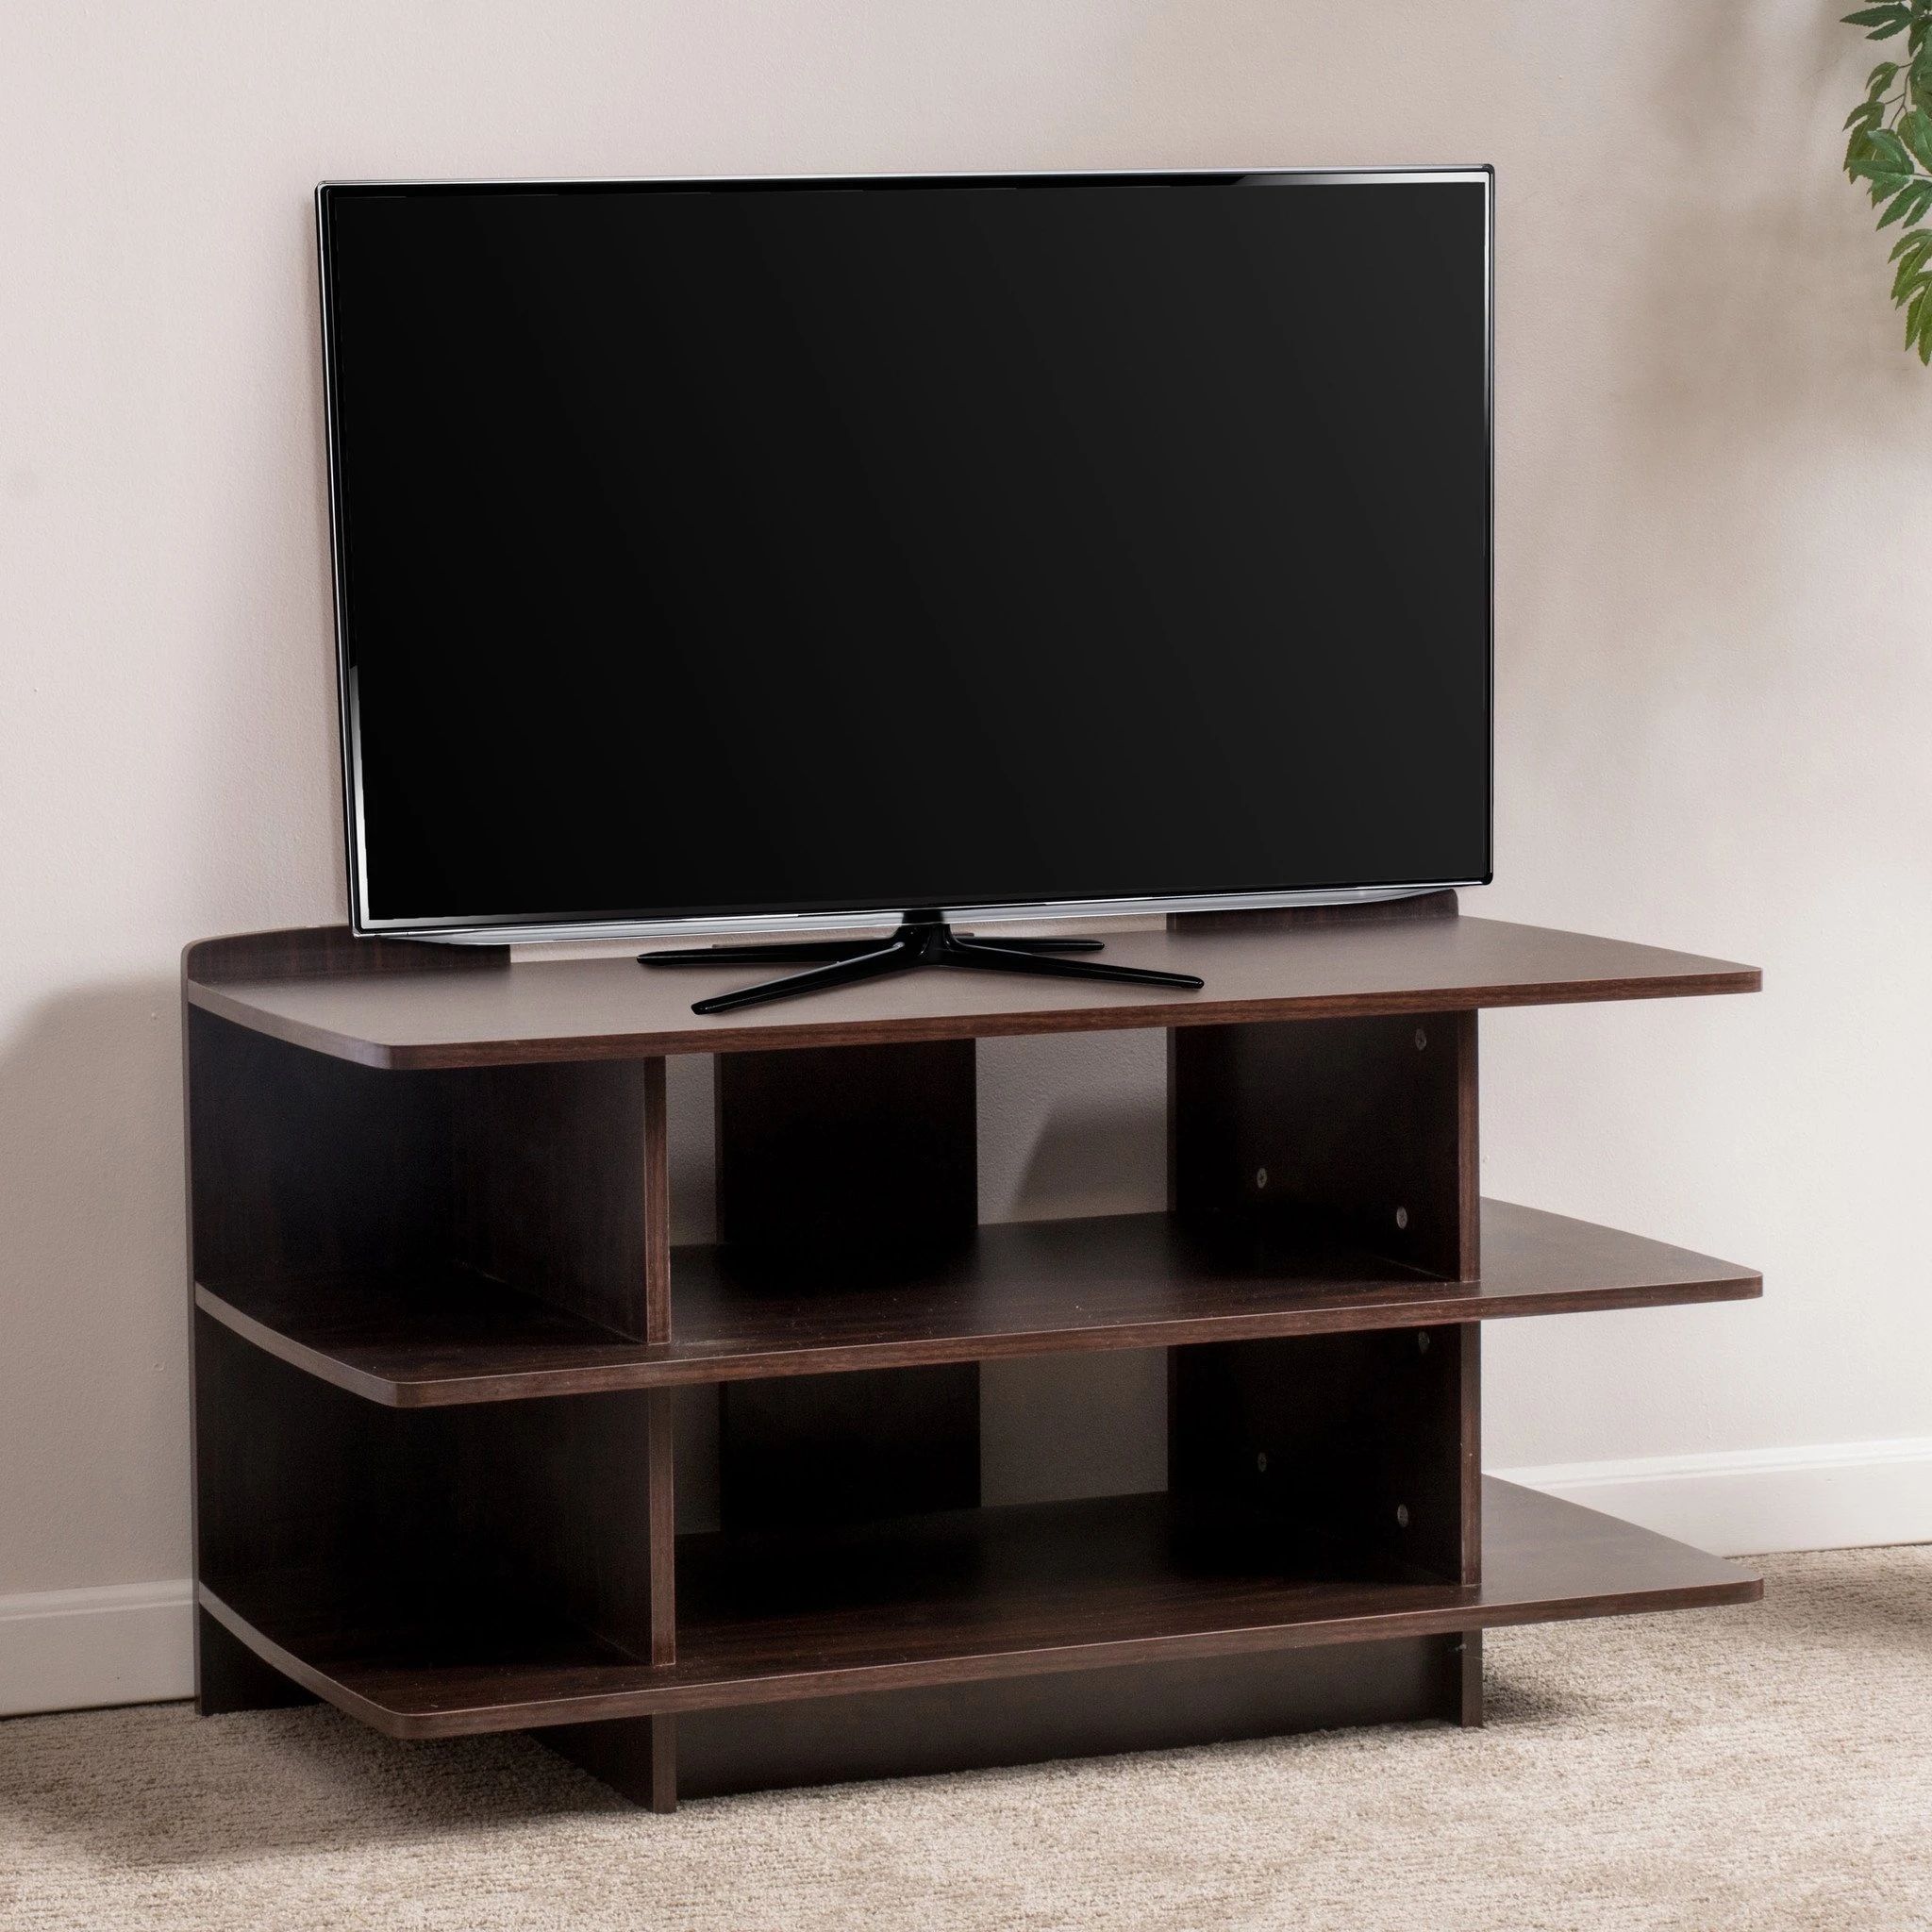 Ian 3 Tier Dark Walnut Wood Tv Console Stand In Tv Stands From With Tier Stand Console Cabinets (View 3 of 20)